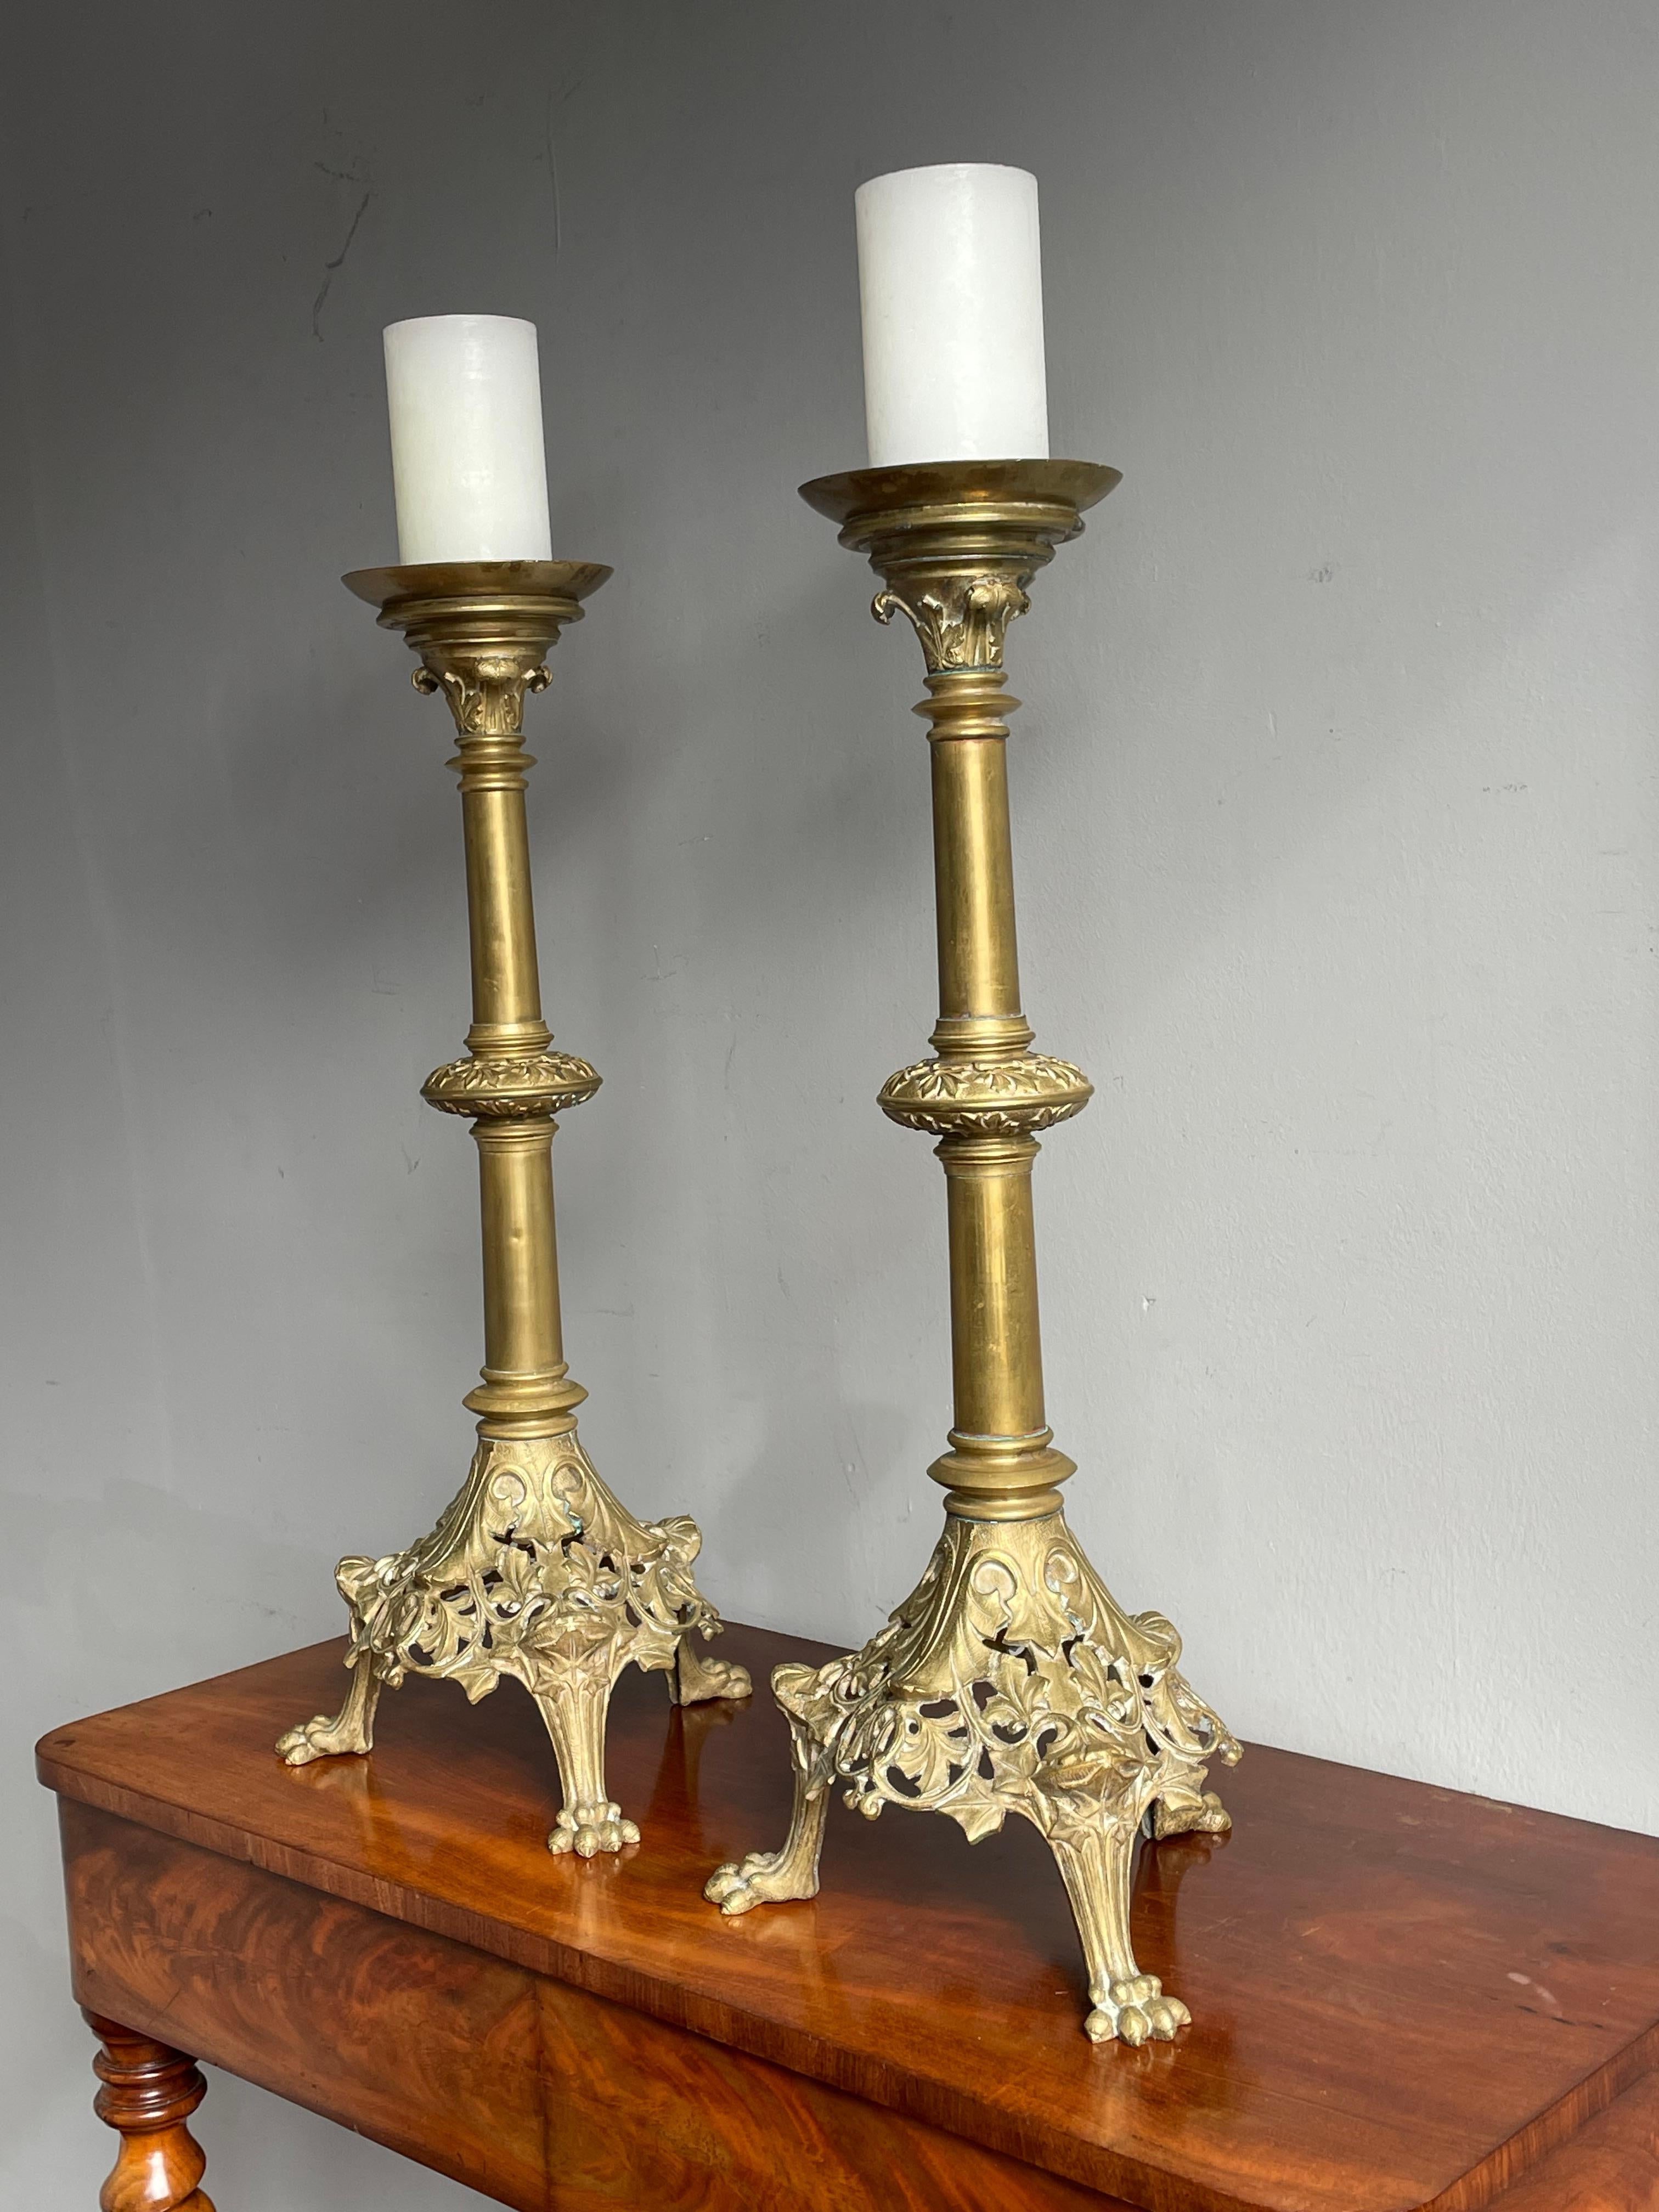 Antique Pair of Bronze Gothic Revival Church Altar Candlesticks / Candle Holders For Sale 9